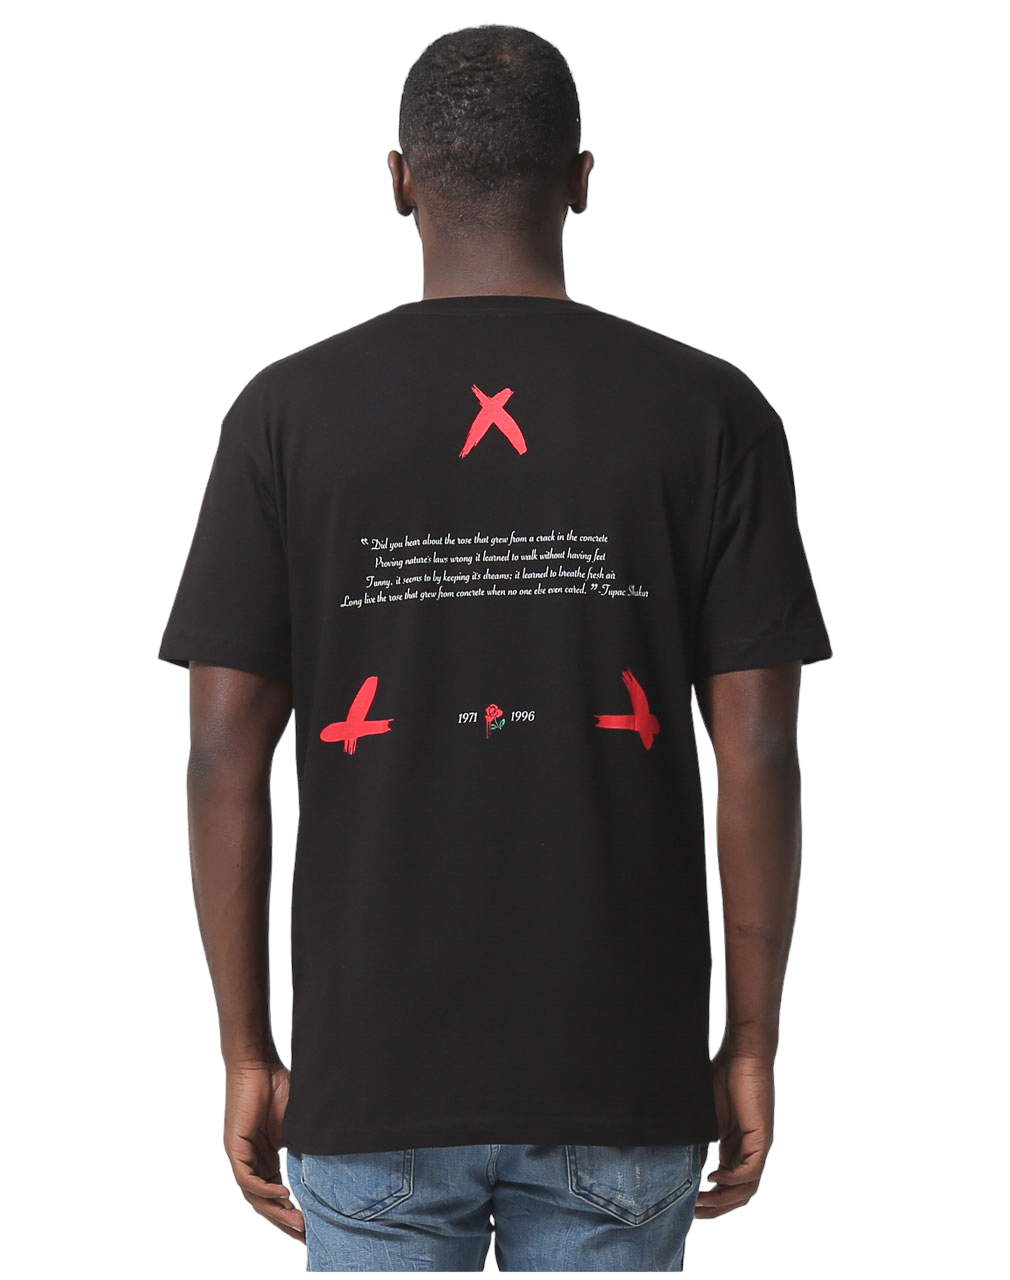 The back view of a man wearing a black t-shirt with red 'X' marks and text.